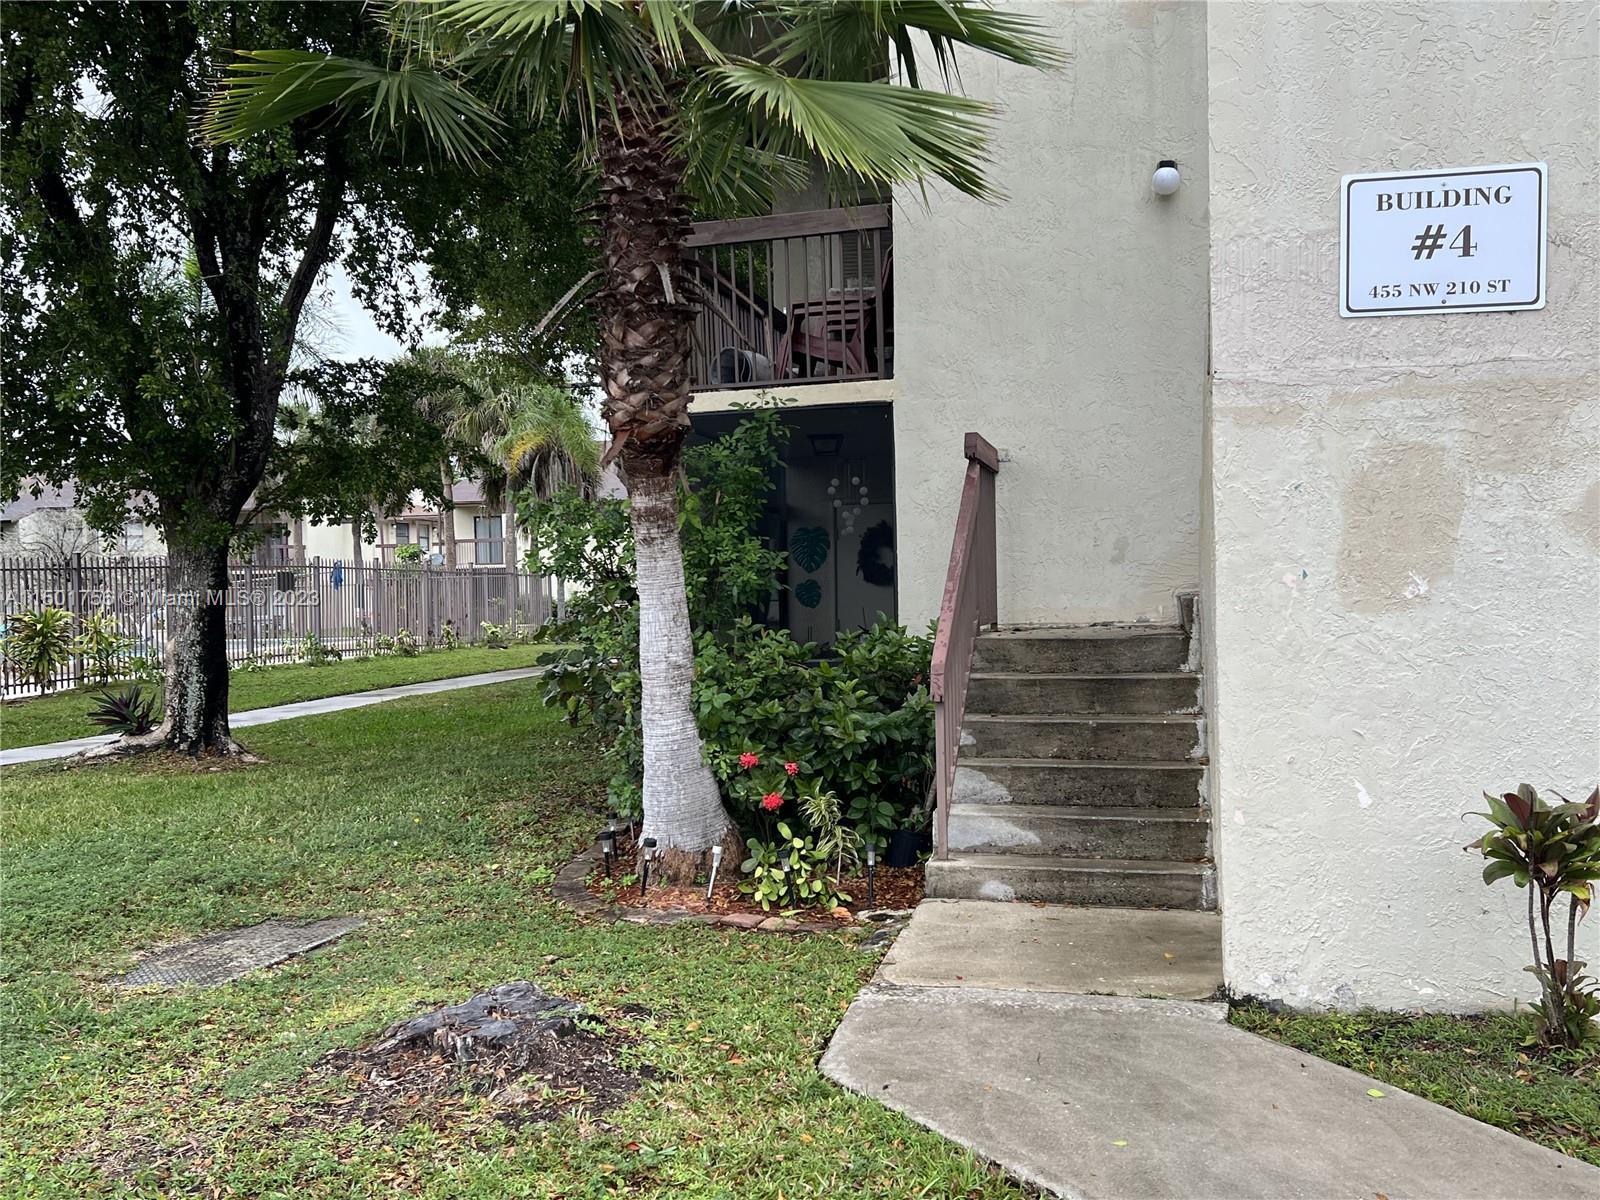 Photo of 455 NW 210th St #205 in Miami Gardens, FL